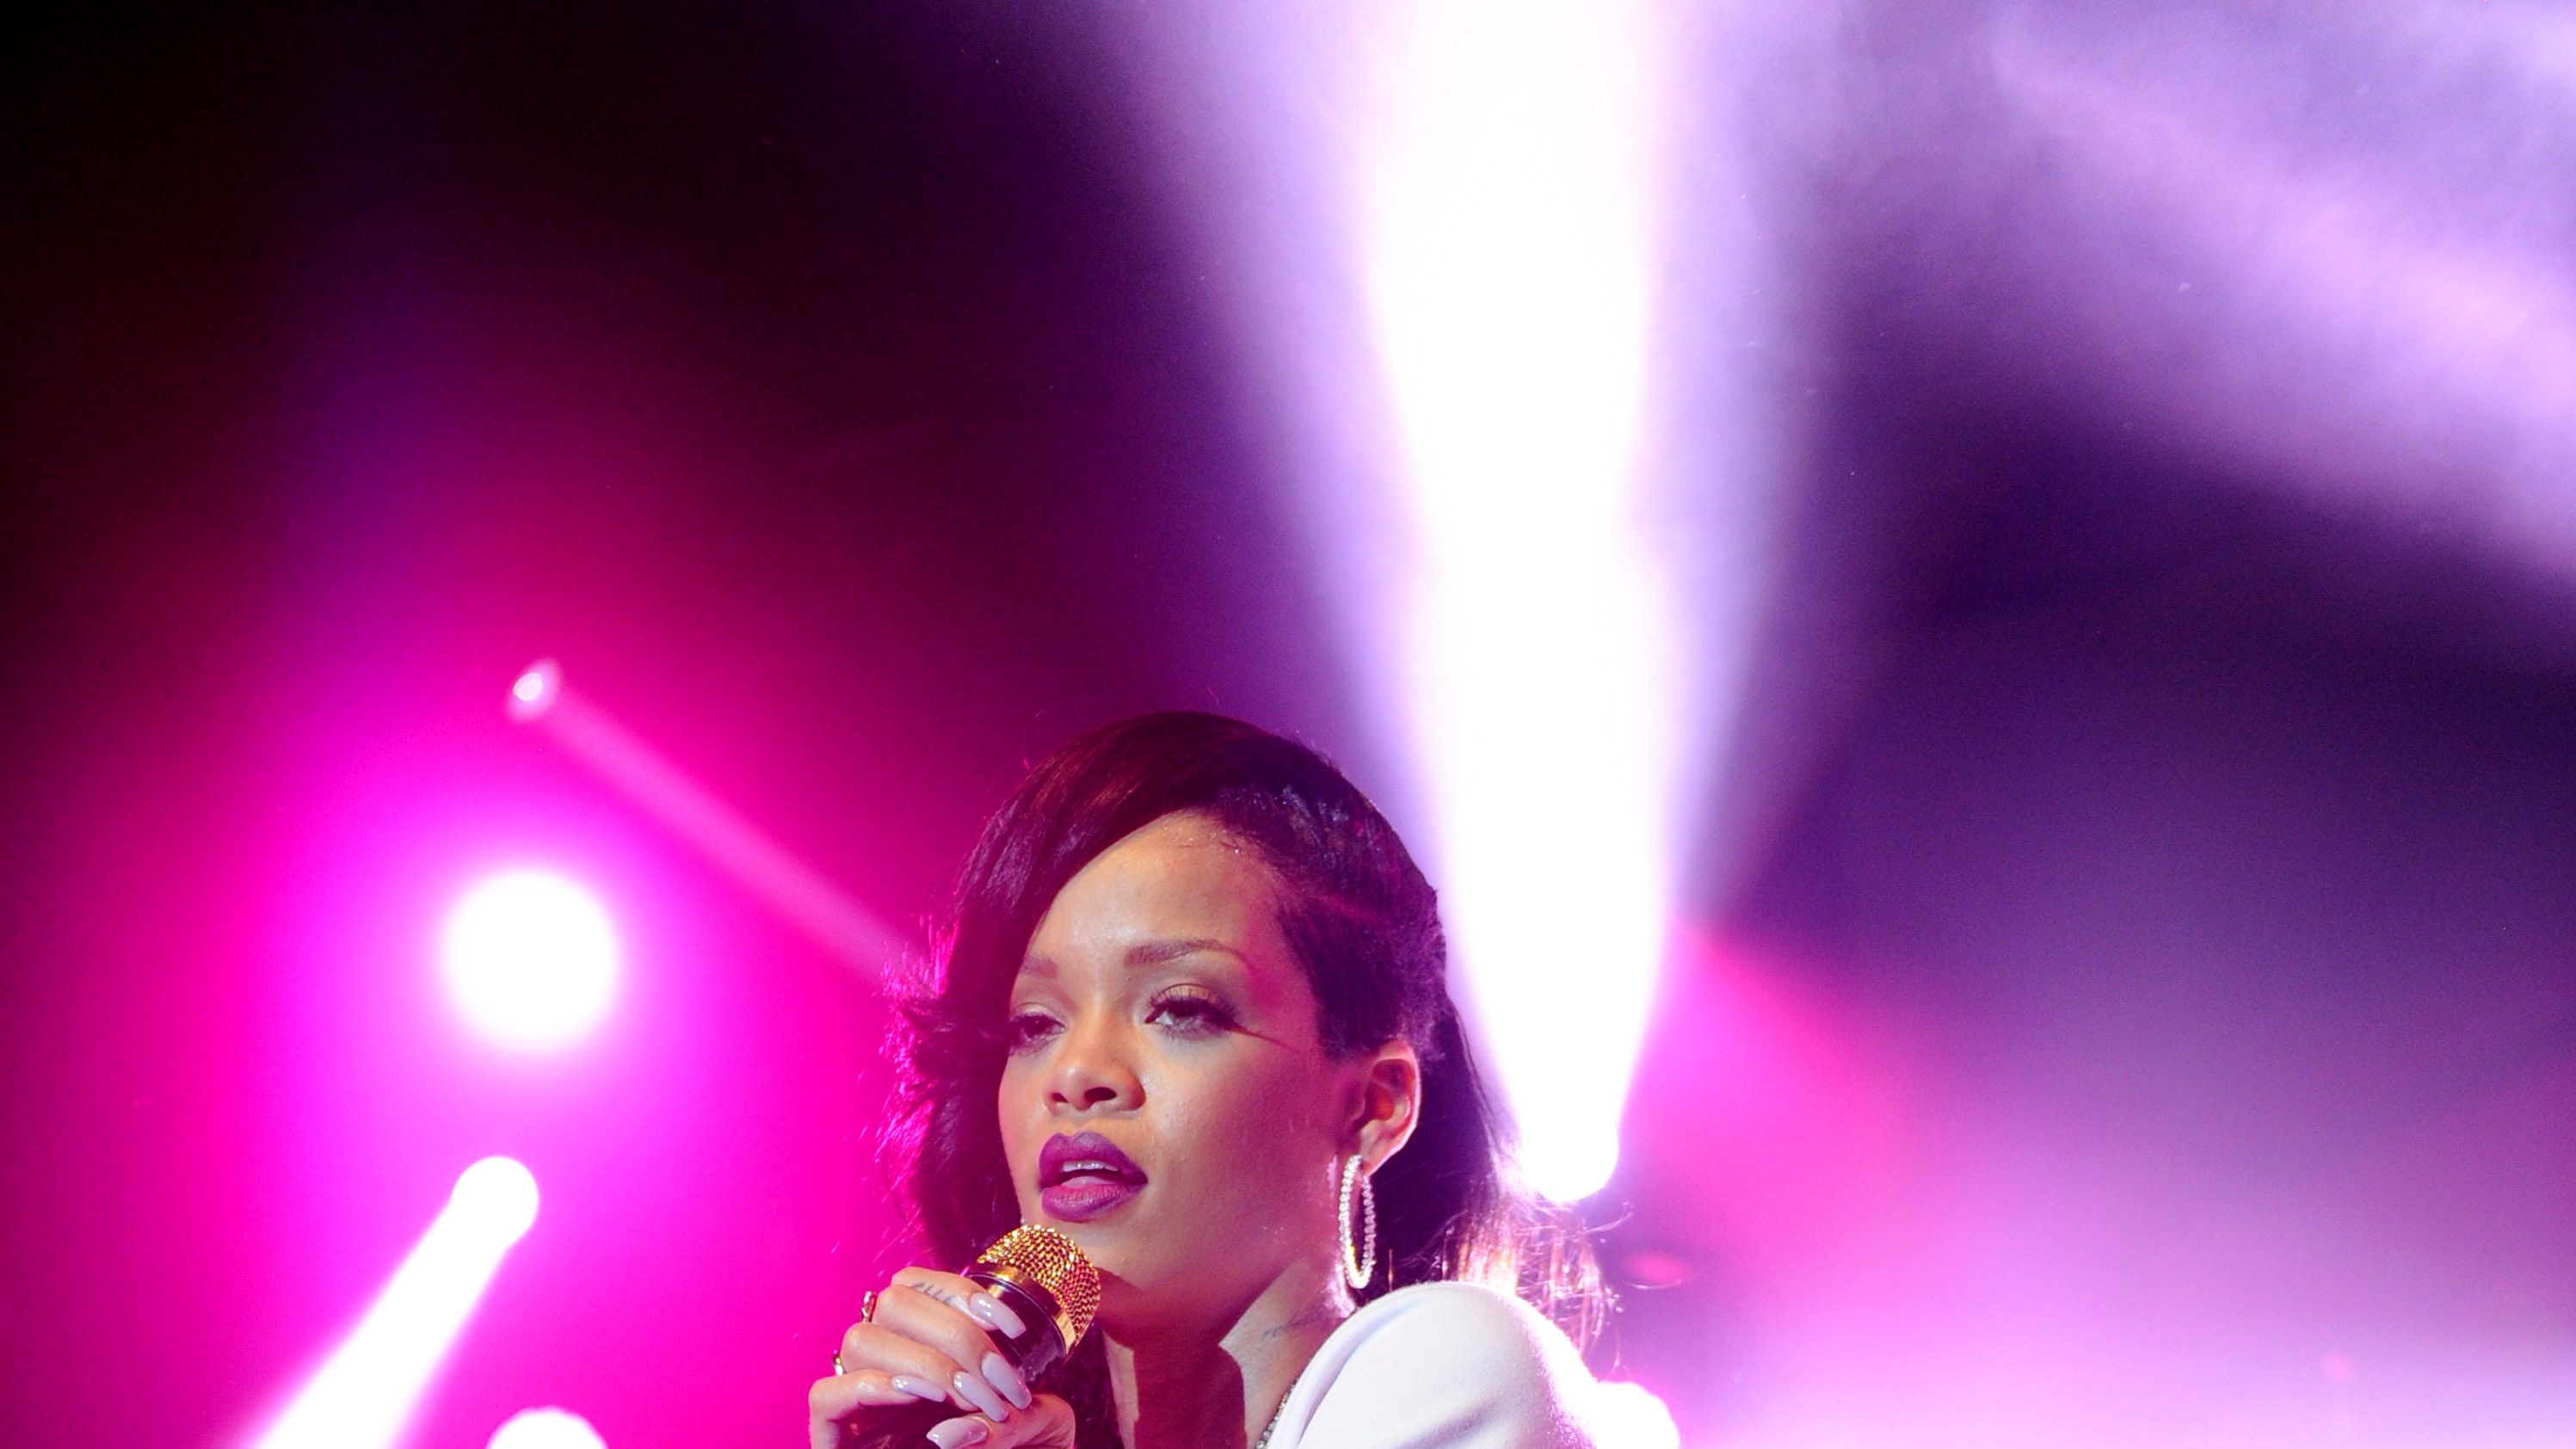 Rihanna Confirms She Is Headlining the Super Bowl Halftime Show